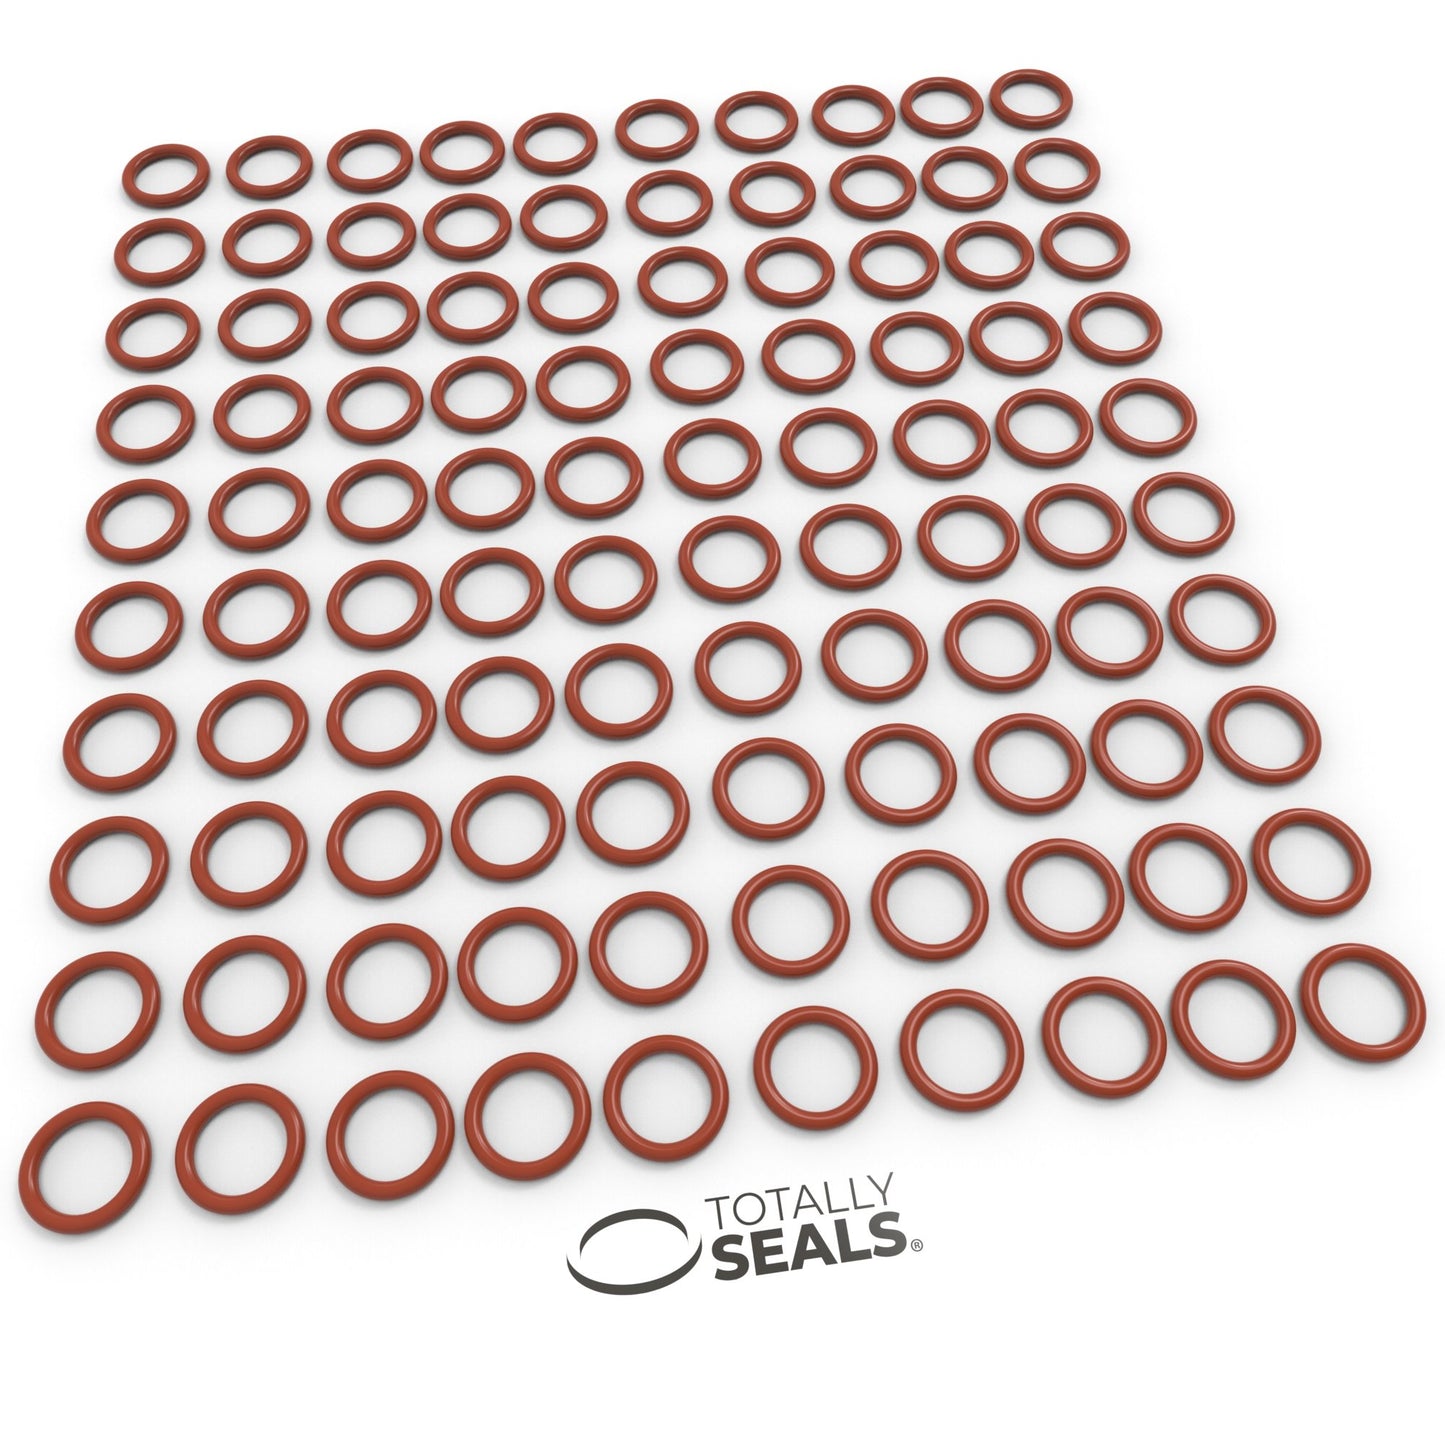 25mm x 2mm (29mm OD) Silicone O-Rings - Totally Seals®